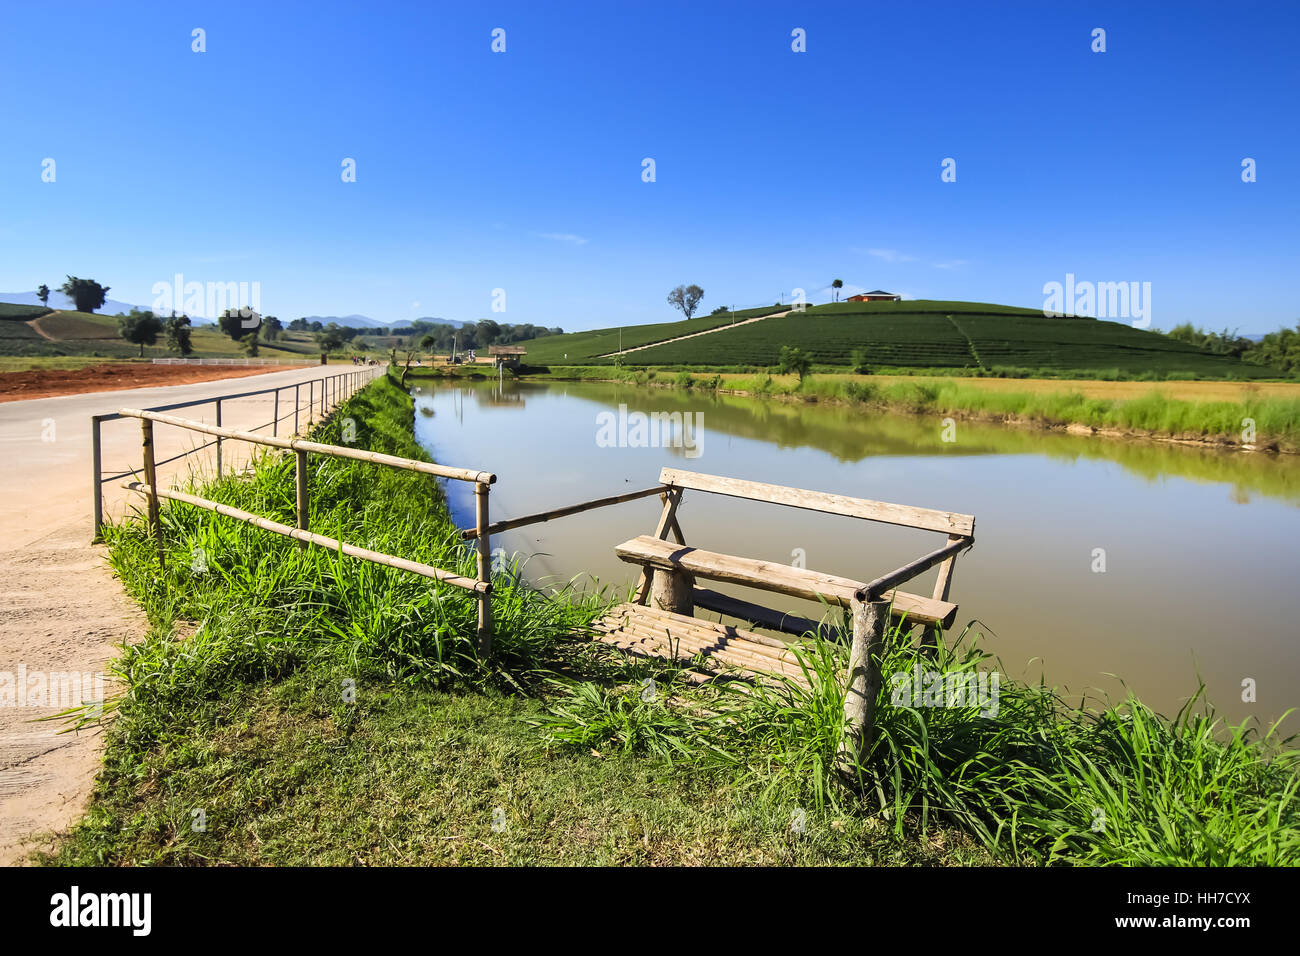 Bench in front of reservoir in the tea plantation, relaxation scene Stock Photo